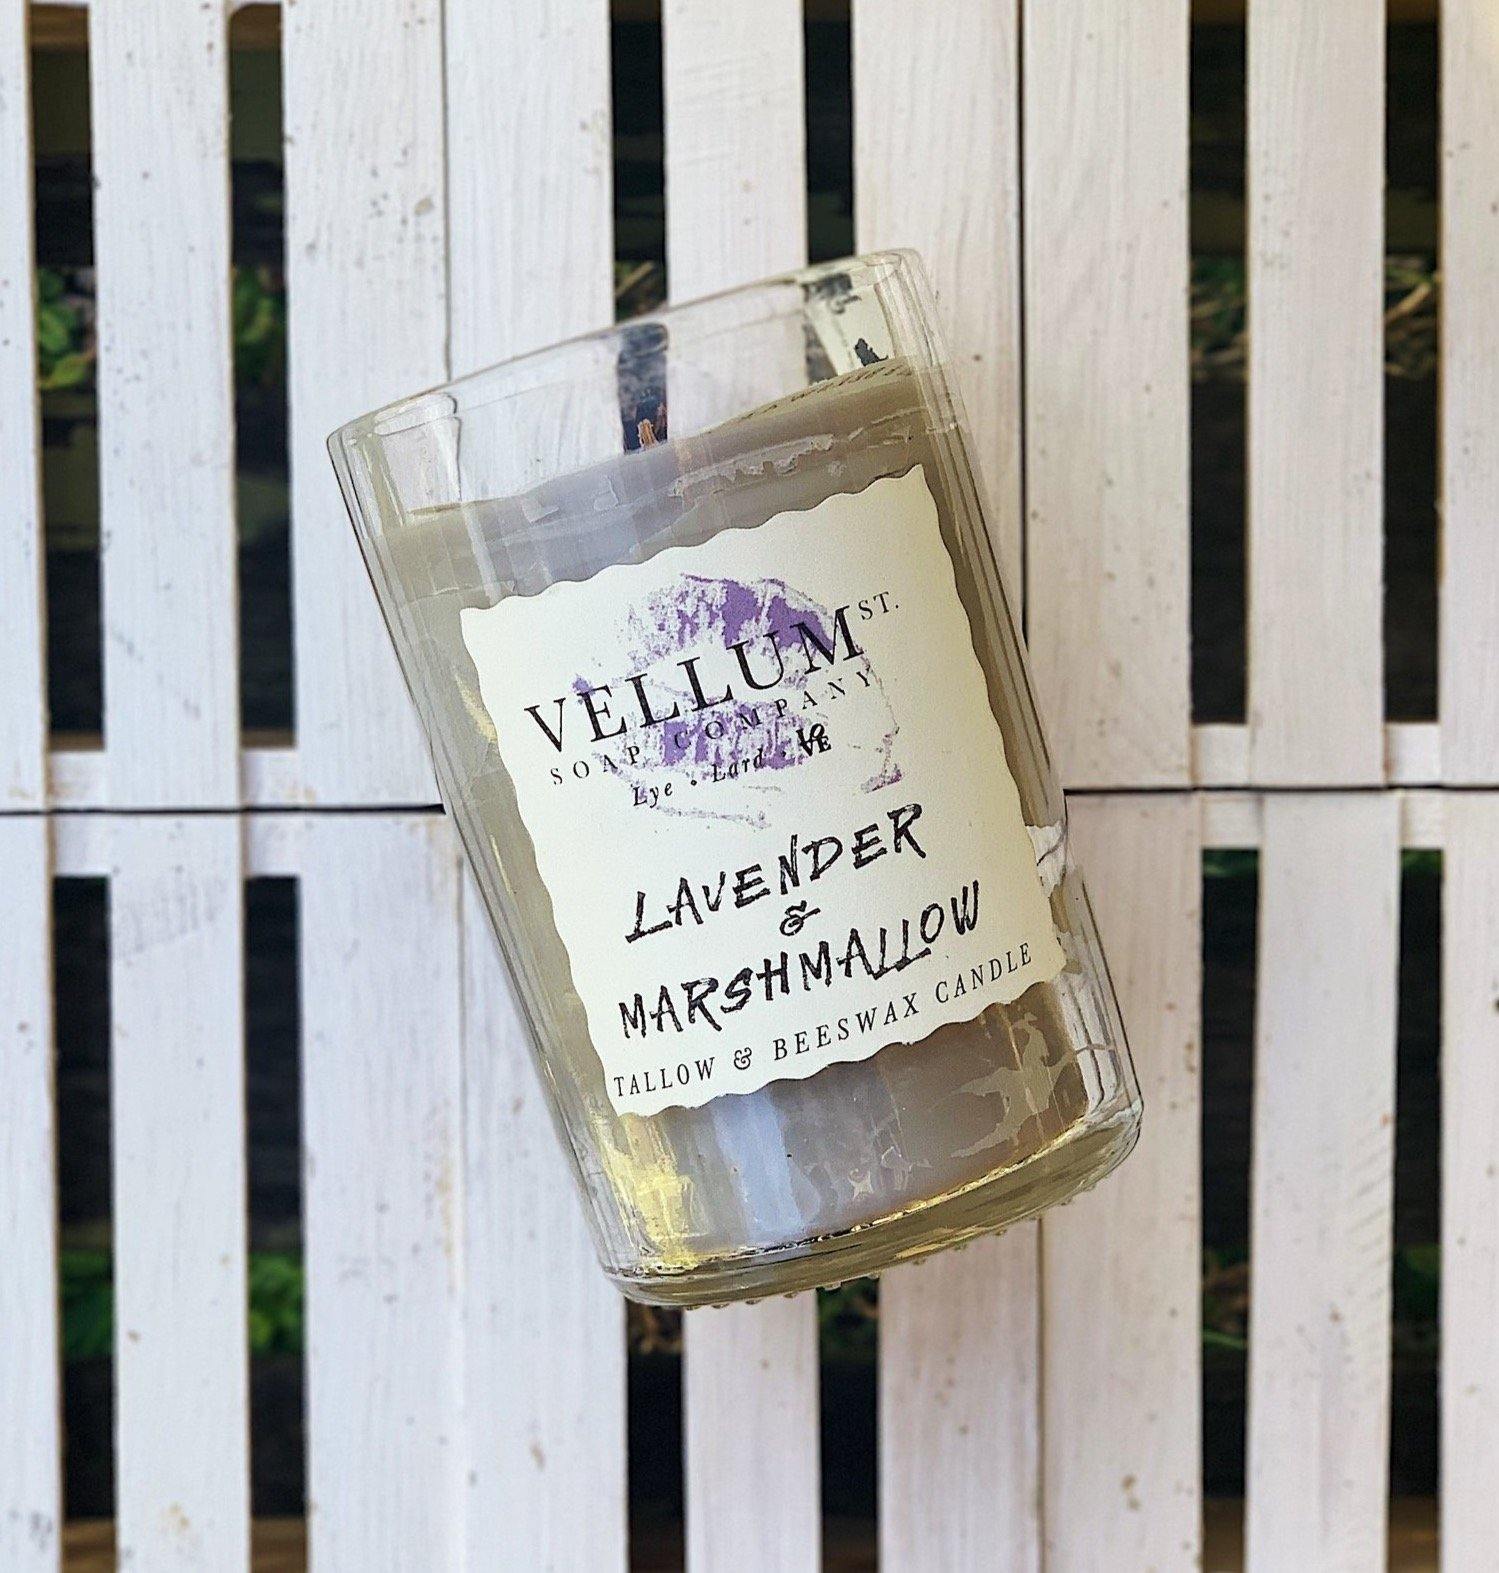 Lavender Marshmallow Tallow & Beeswax Candle - Revival Phl